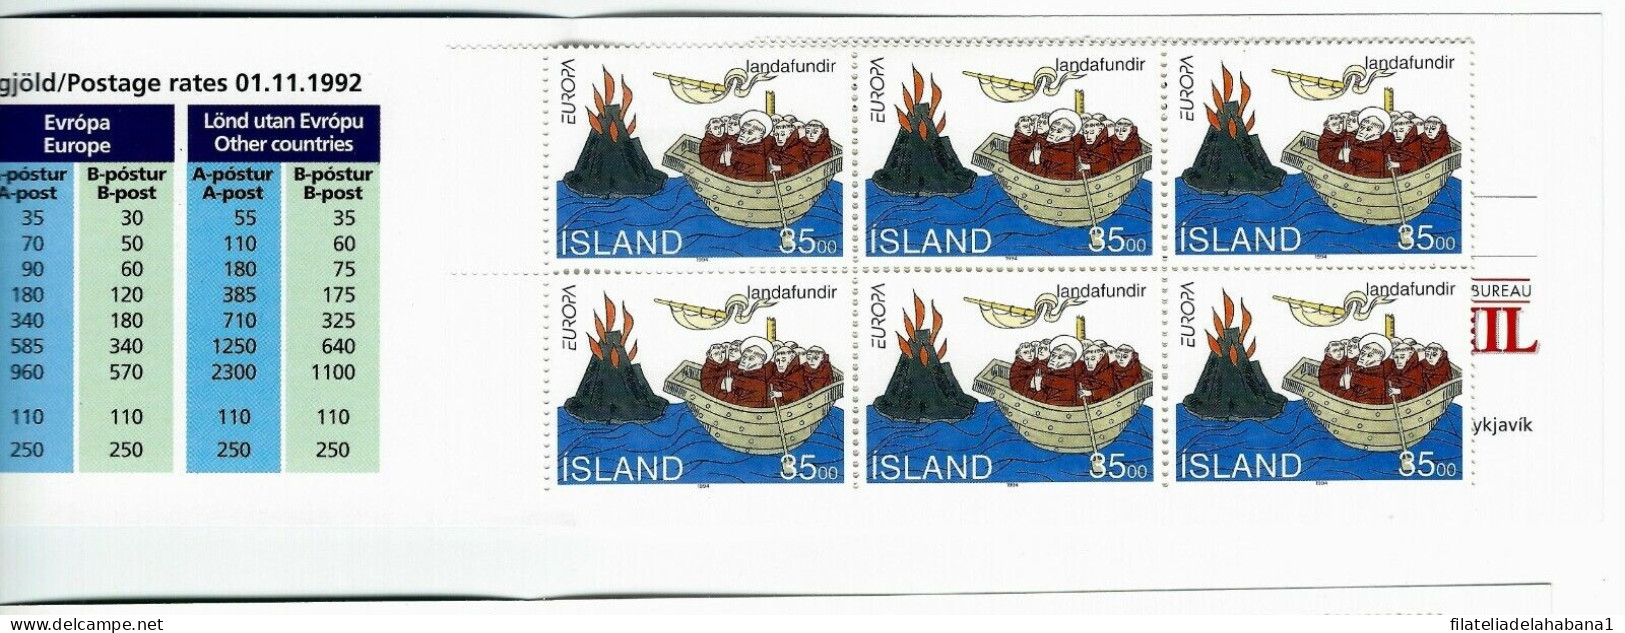 F-EX50056 ICELAND MNH 1994 EUROPA BOOKLED VOYAGE OF ST BRENDAN.  - Unused Stamps